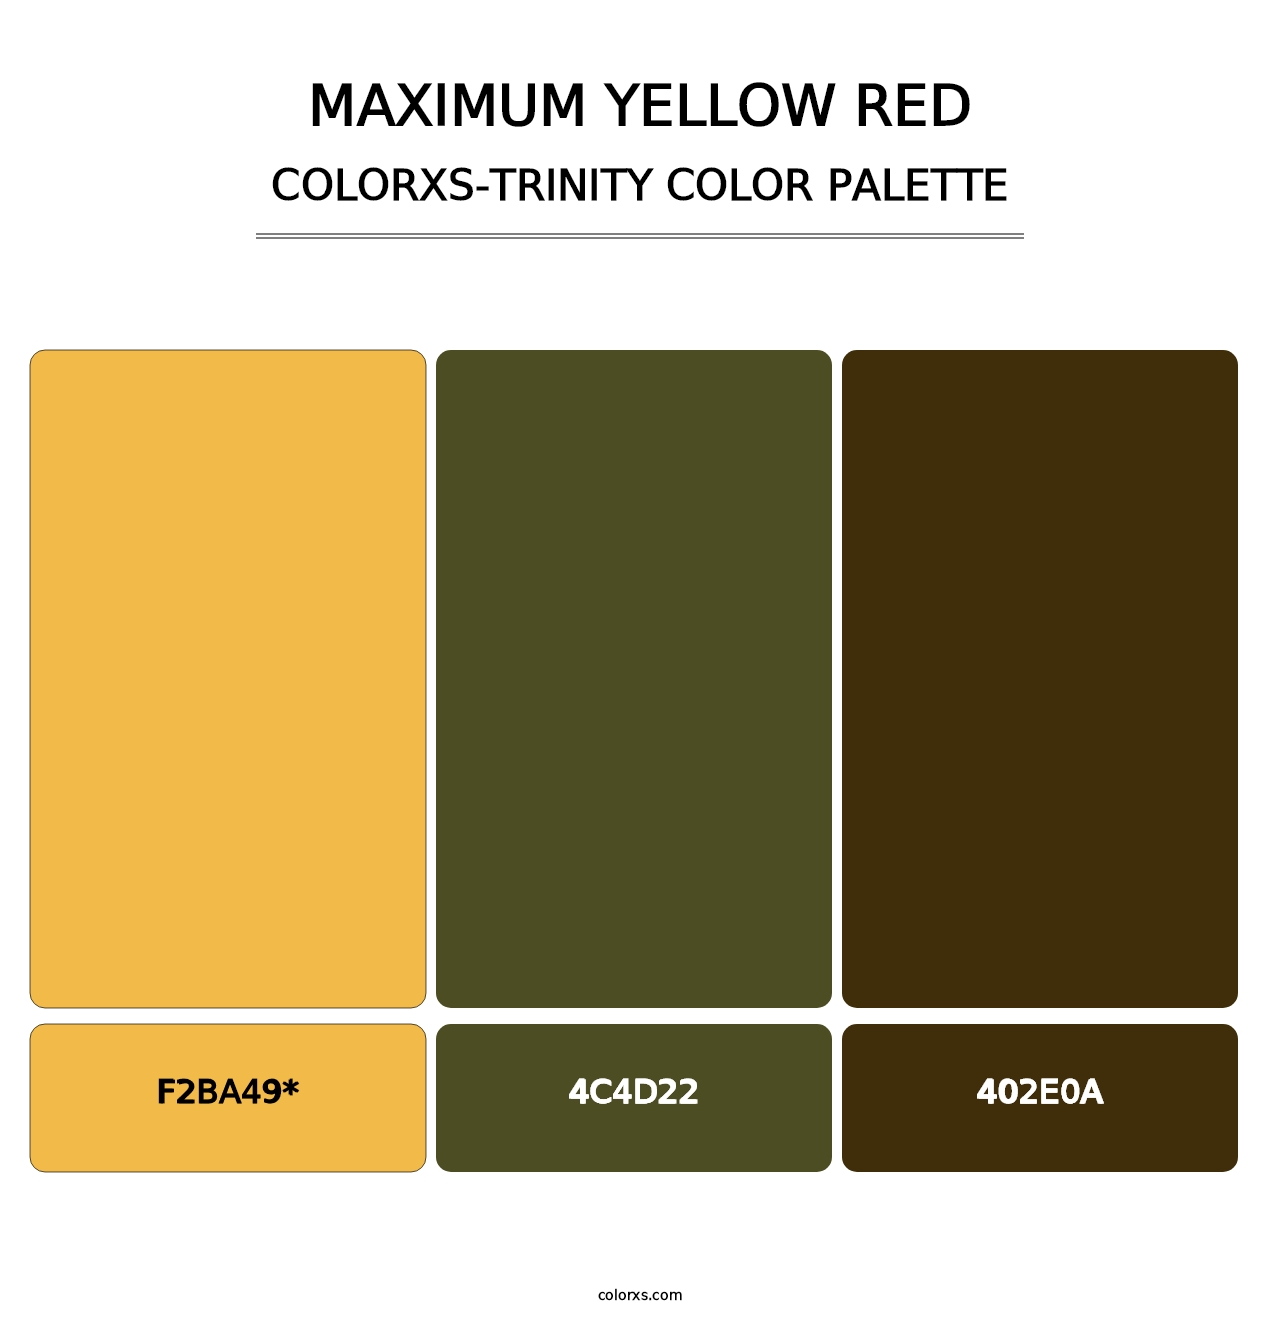 Maximum Yellow Red - Colorxs Trinity Palette